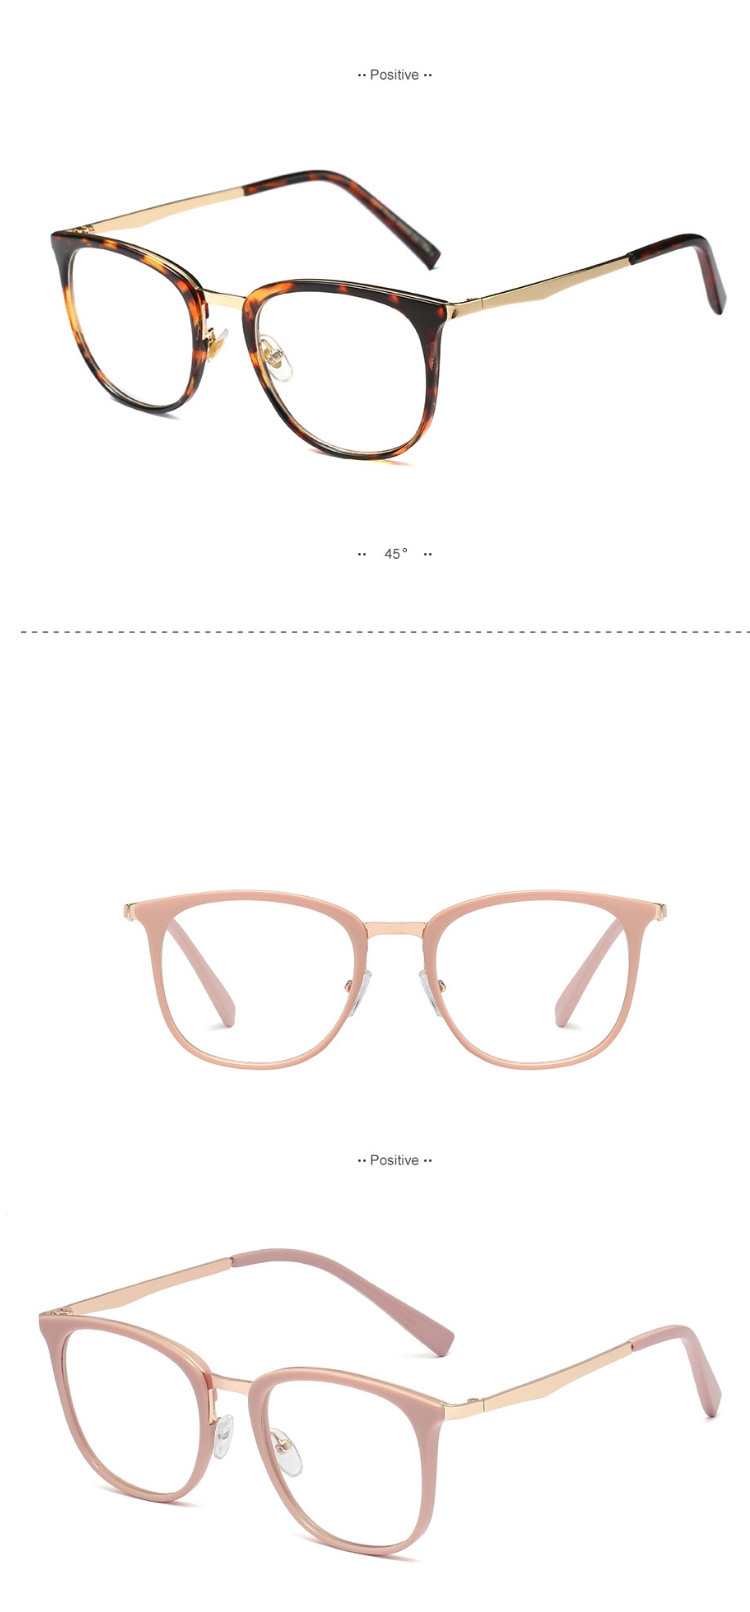 Fashion C2 Solid Powder/transparent Ultra-light Can Be Equipped With Myopia Round Frame,Fashion Glasses